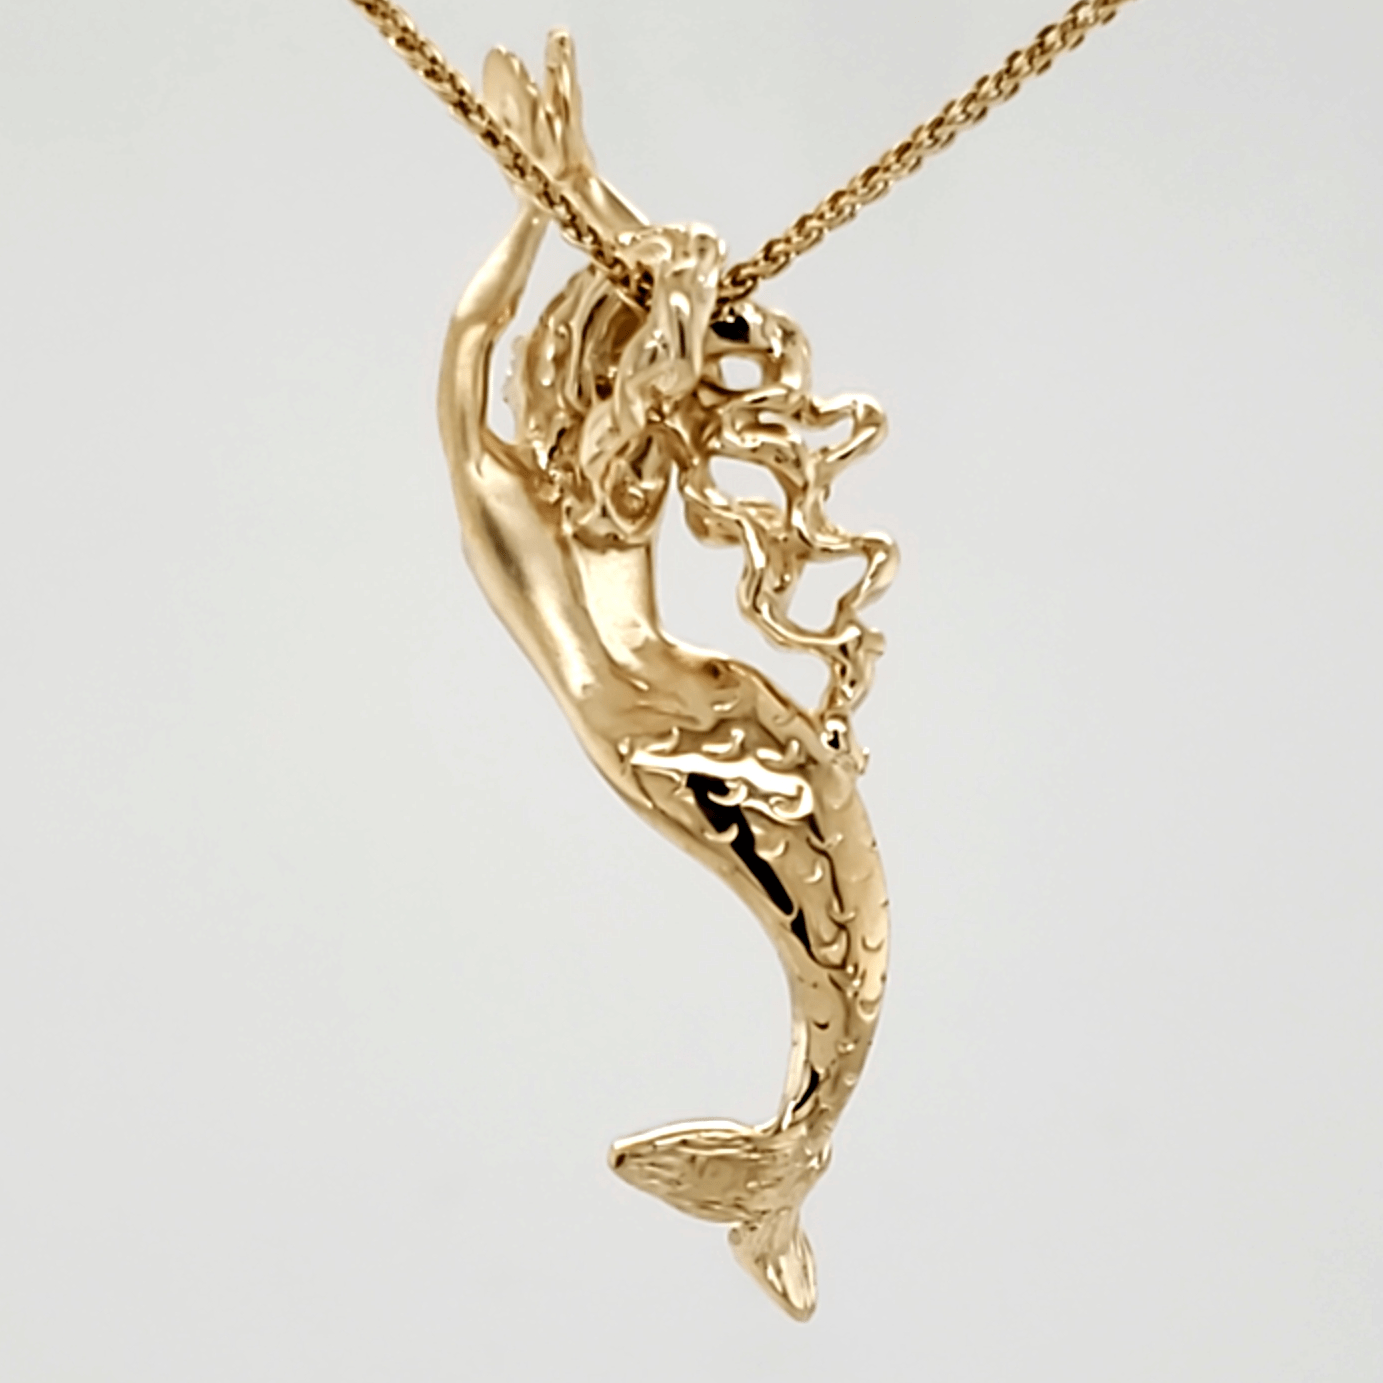 Goldie the Mermaid Pendant with Fresh Water Pear.